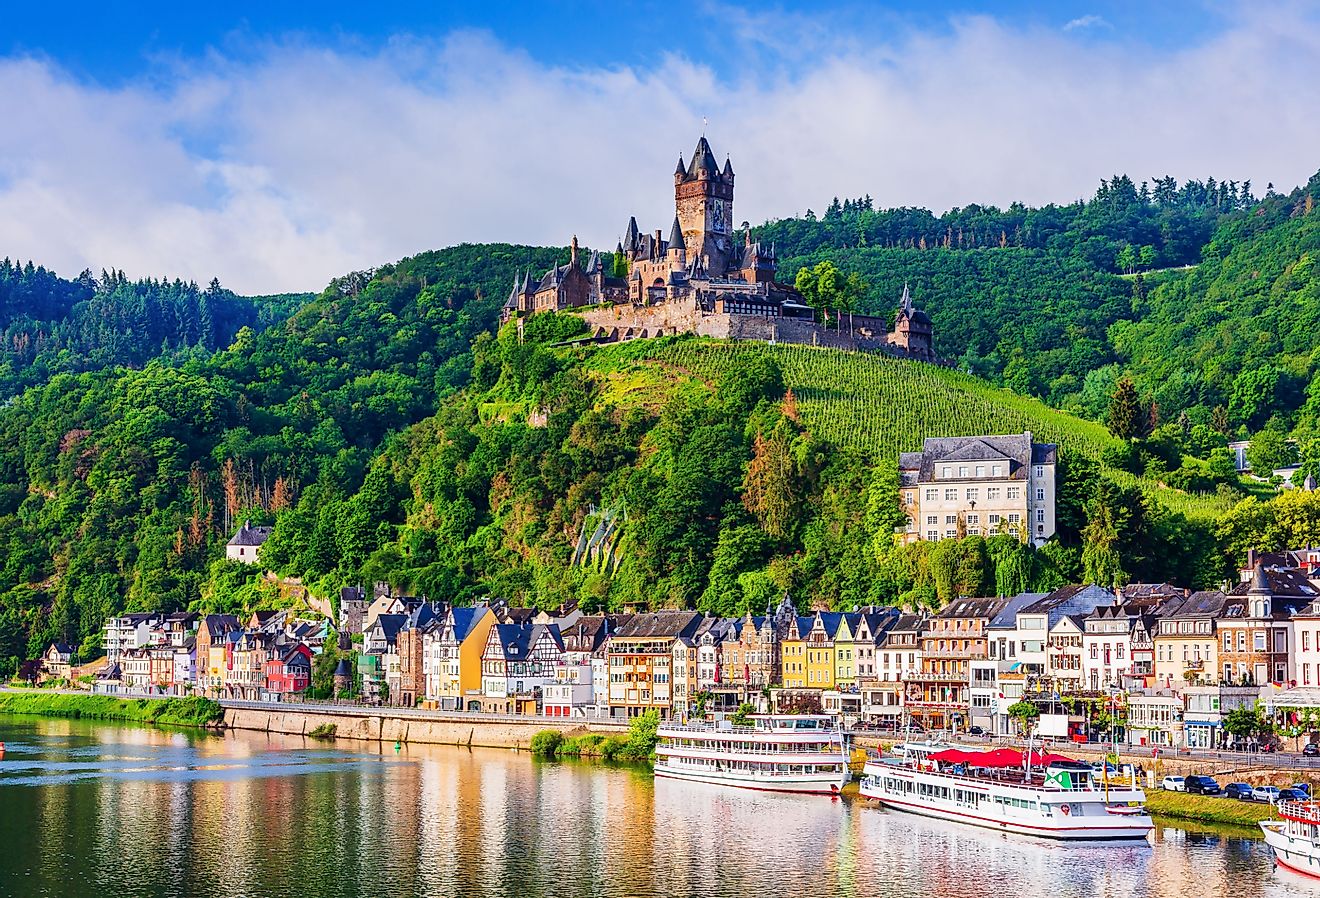 Old town and the Cochem (Reichsburg) castle on the Moselle river, Cochem, Germany.